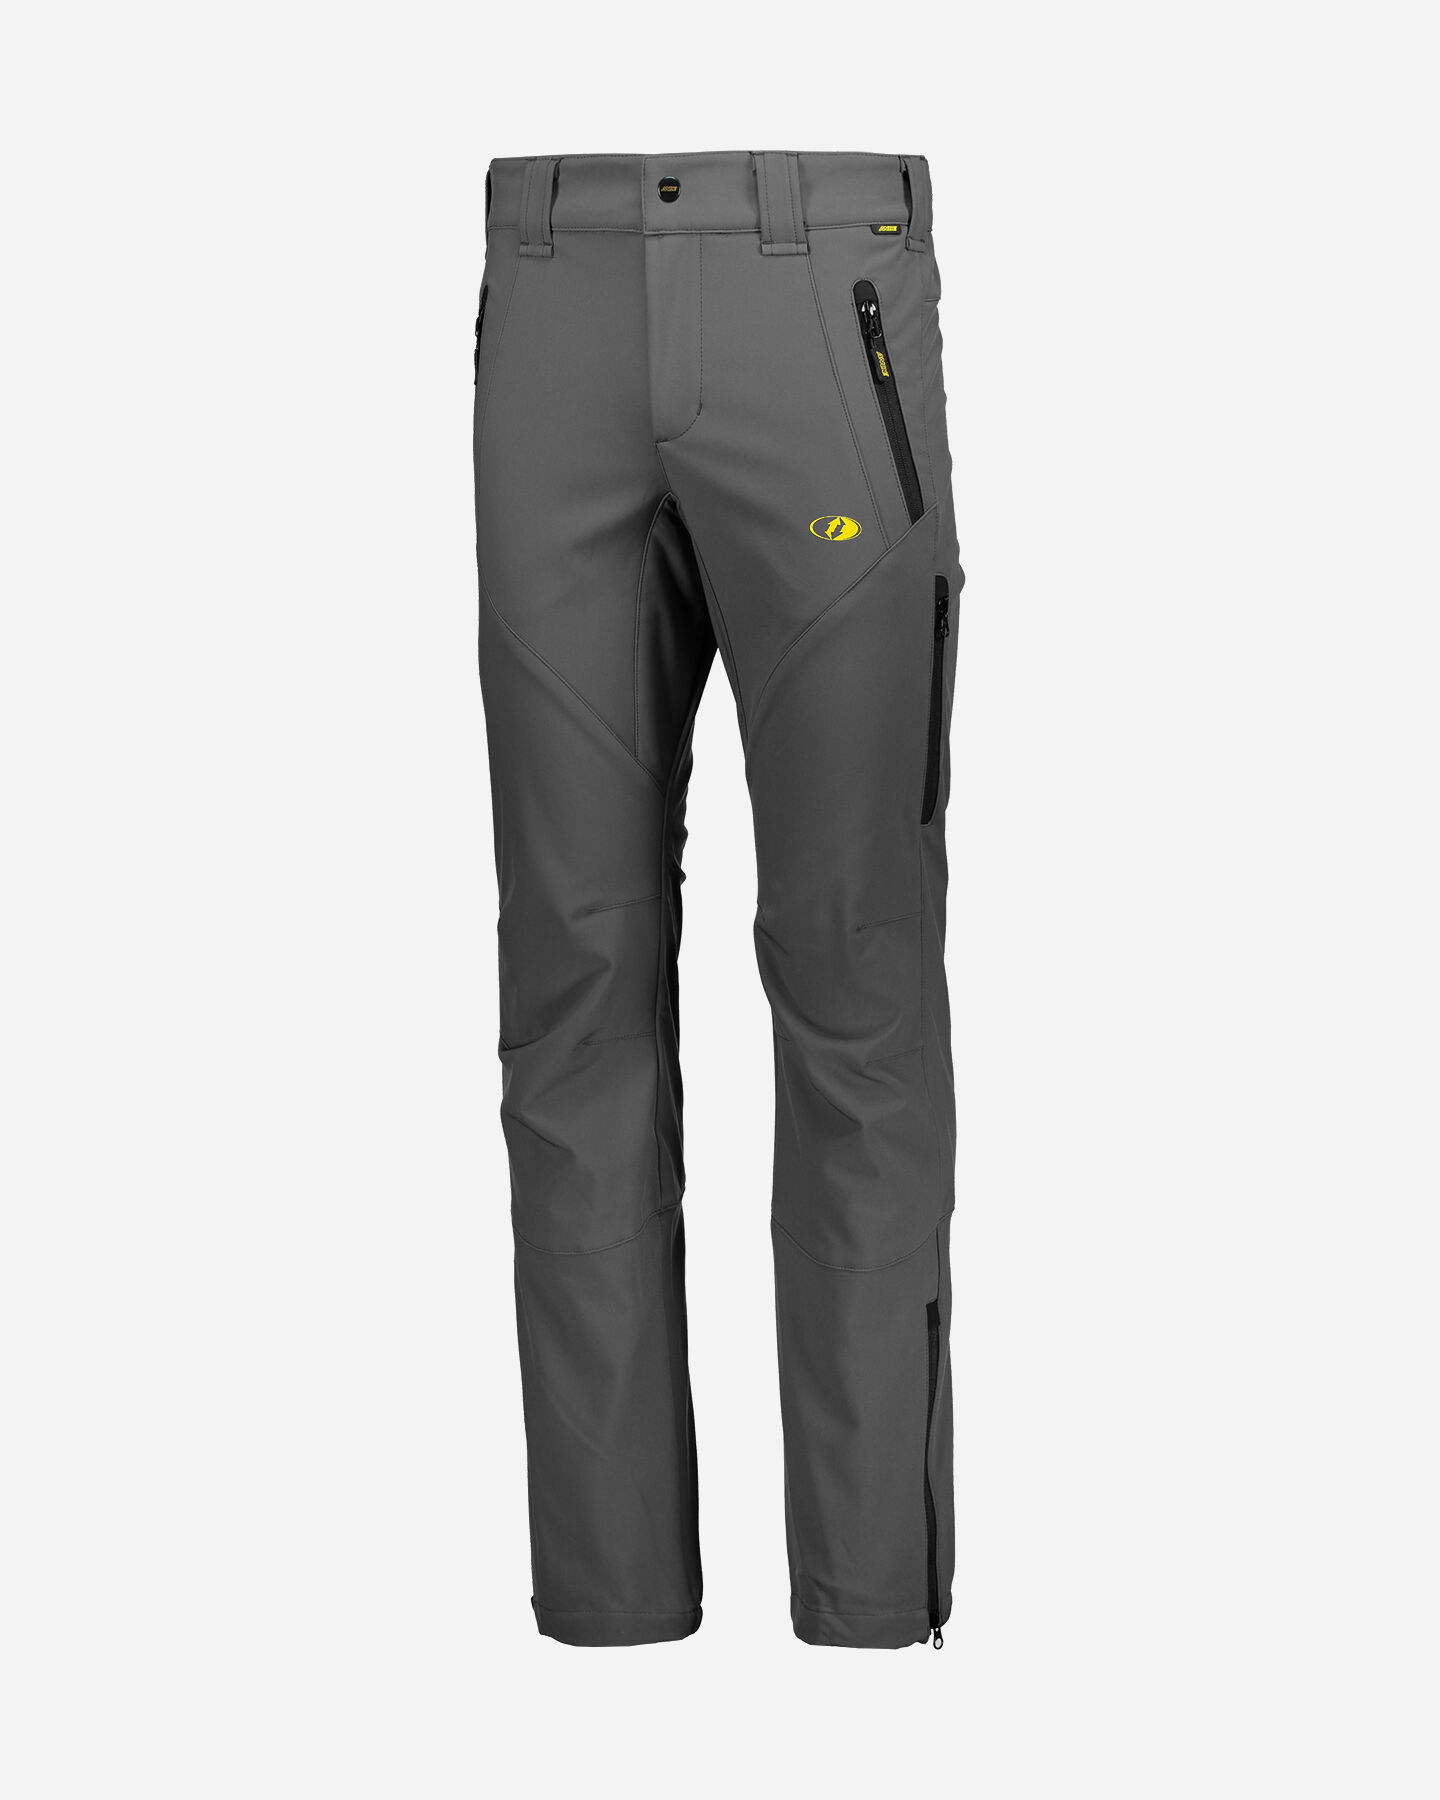  Pantalone outdoor ANDE SHERPA M S4069497|1|46 scatto 0